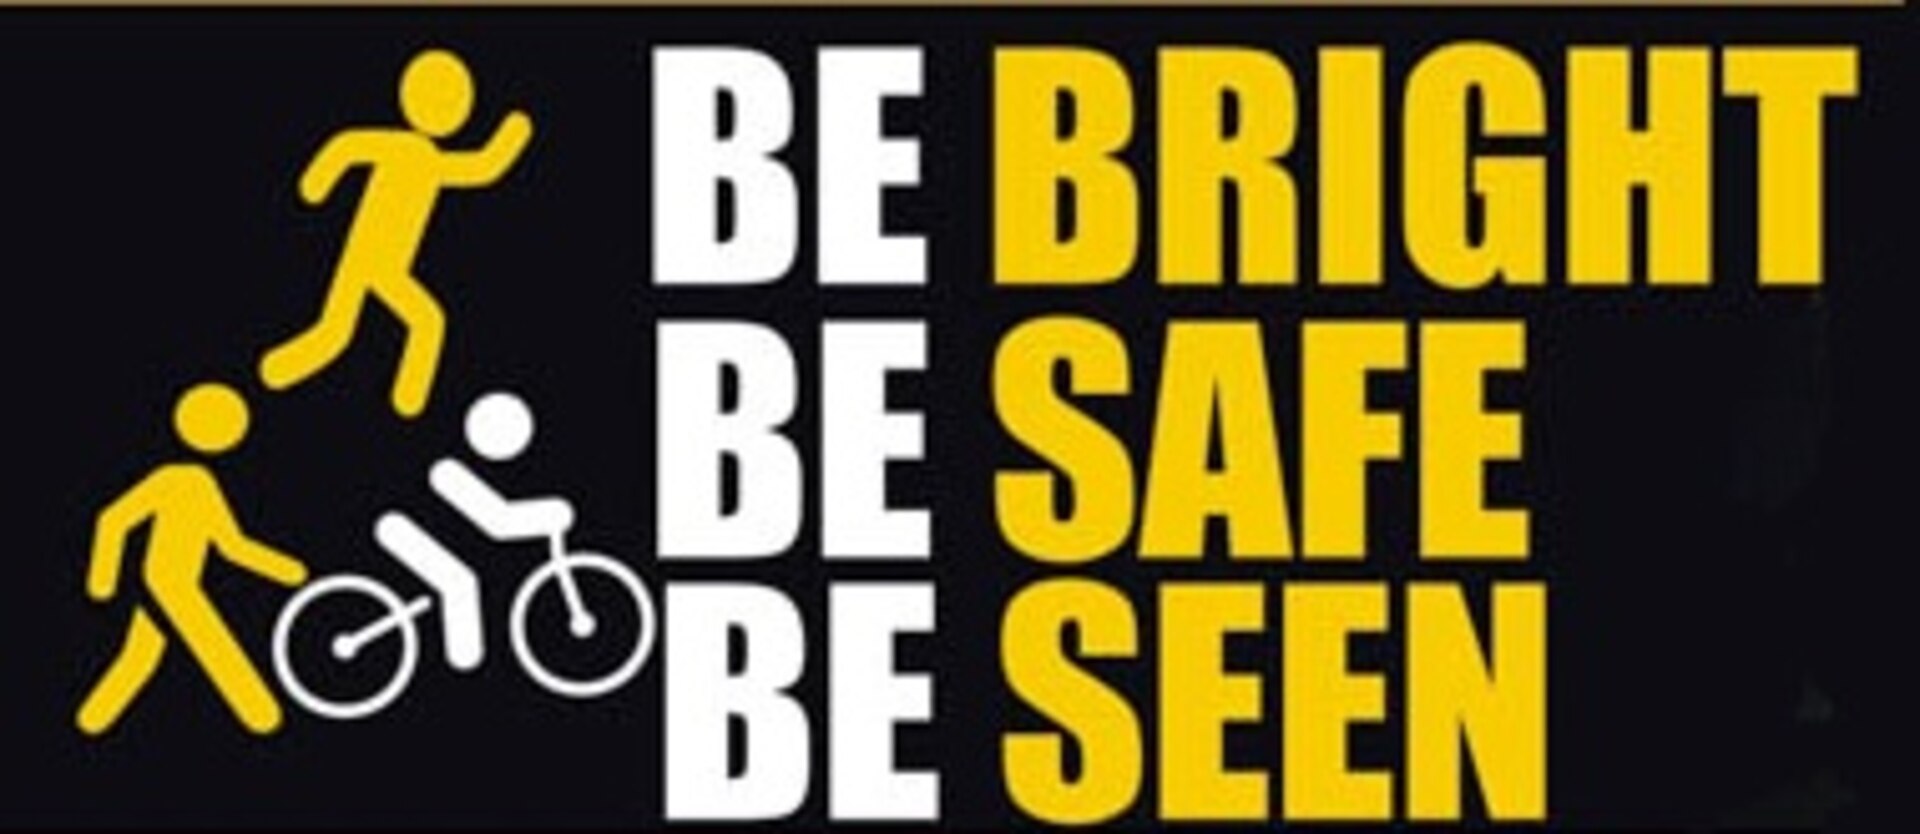 "Be Bright, Be Safe, Be Seen" is aimed at all road users; pedestrians, cyclists’ runners and drivers of all types of vehicles, to highlight the importance of being extra-cautious throughout the year in times of low visibility and darkness.